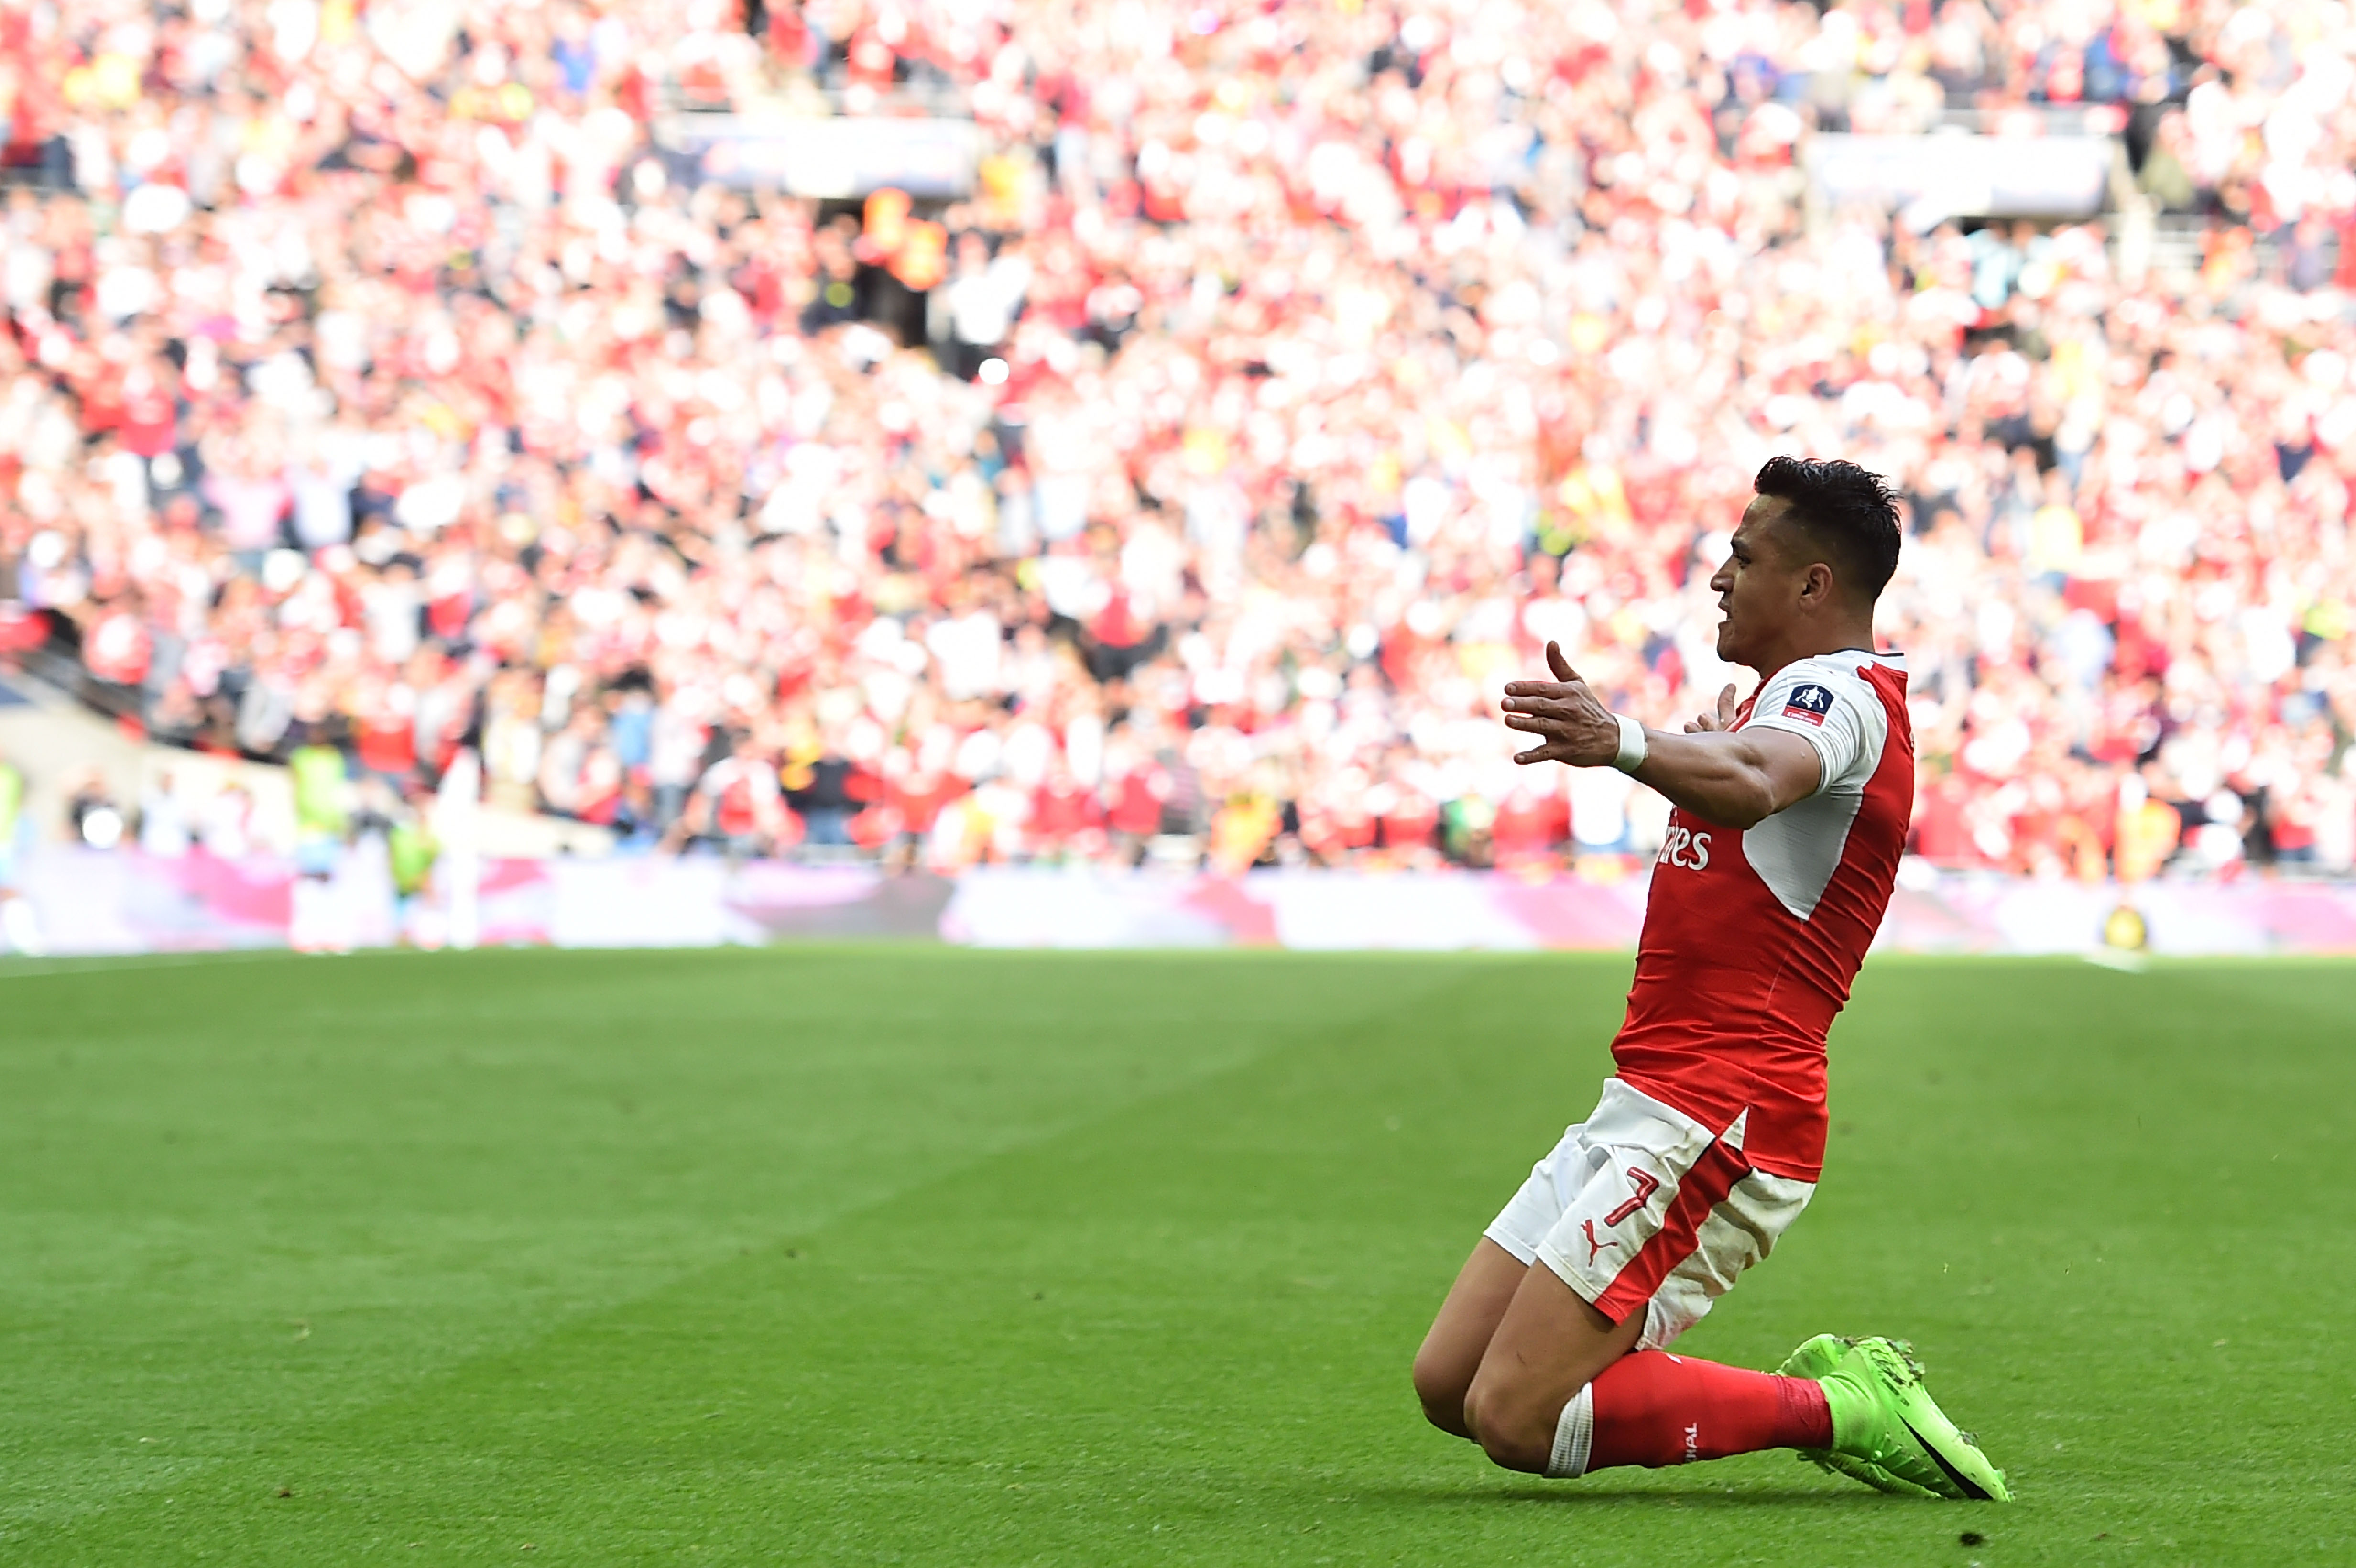 Arsenal's Chilean striker Alexis Sanchez celebrates scoring their second goal during the FA Cup semi-final football match between Arsenal and Manchester City at Wembley stadium in London on April 23, 2017. / AFP PHOTO / Glyn KIRK / NOT FOR MARKETING OR ADVERTISING USE / RESTRICTED TO EDITORIAL USE
        (Photo credit should read GLYN KIRK/AFP/Getty Images)